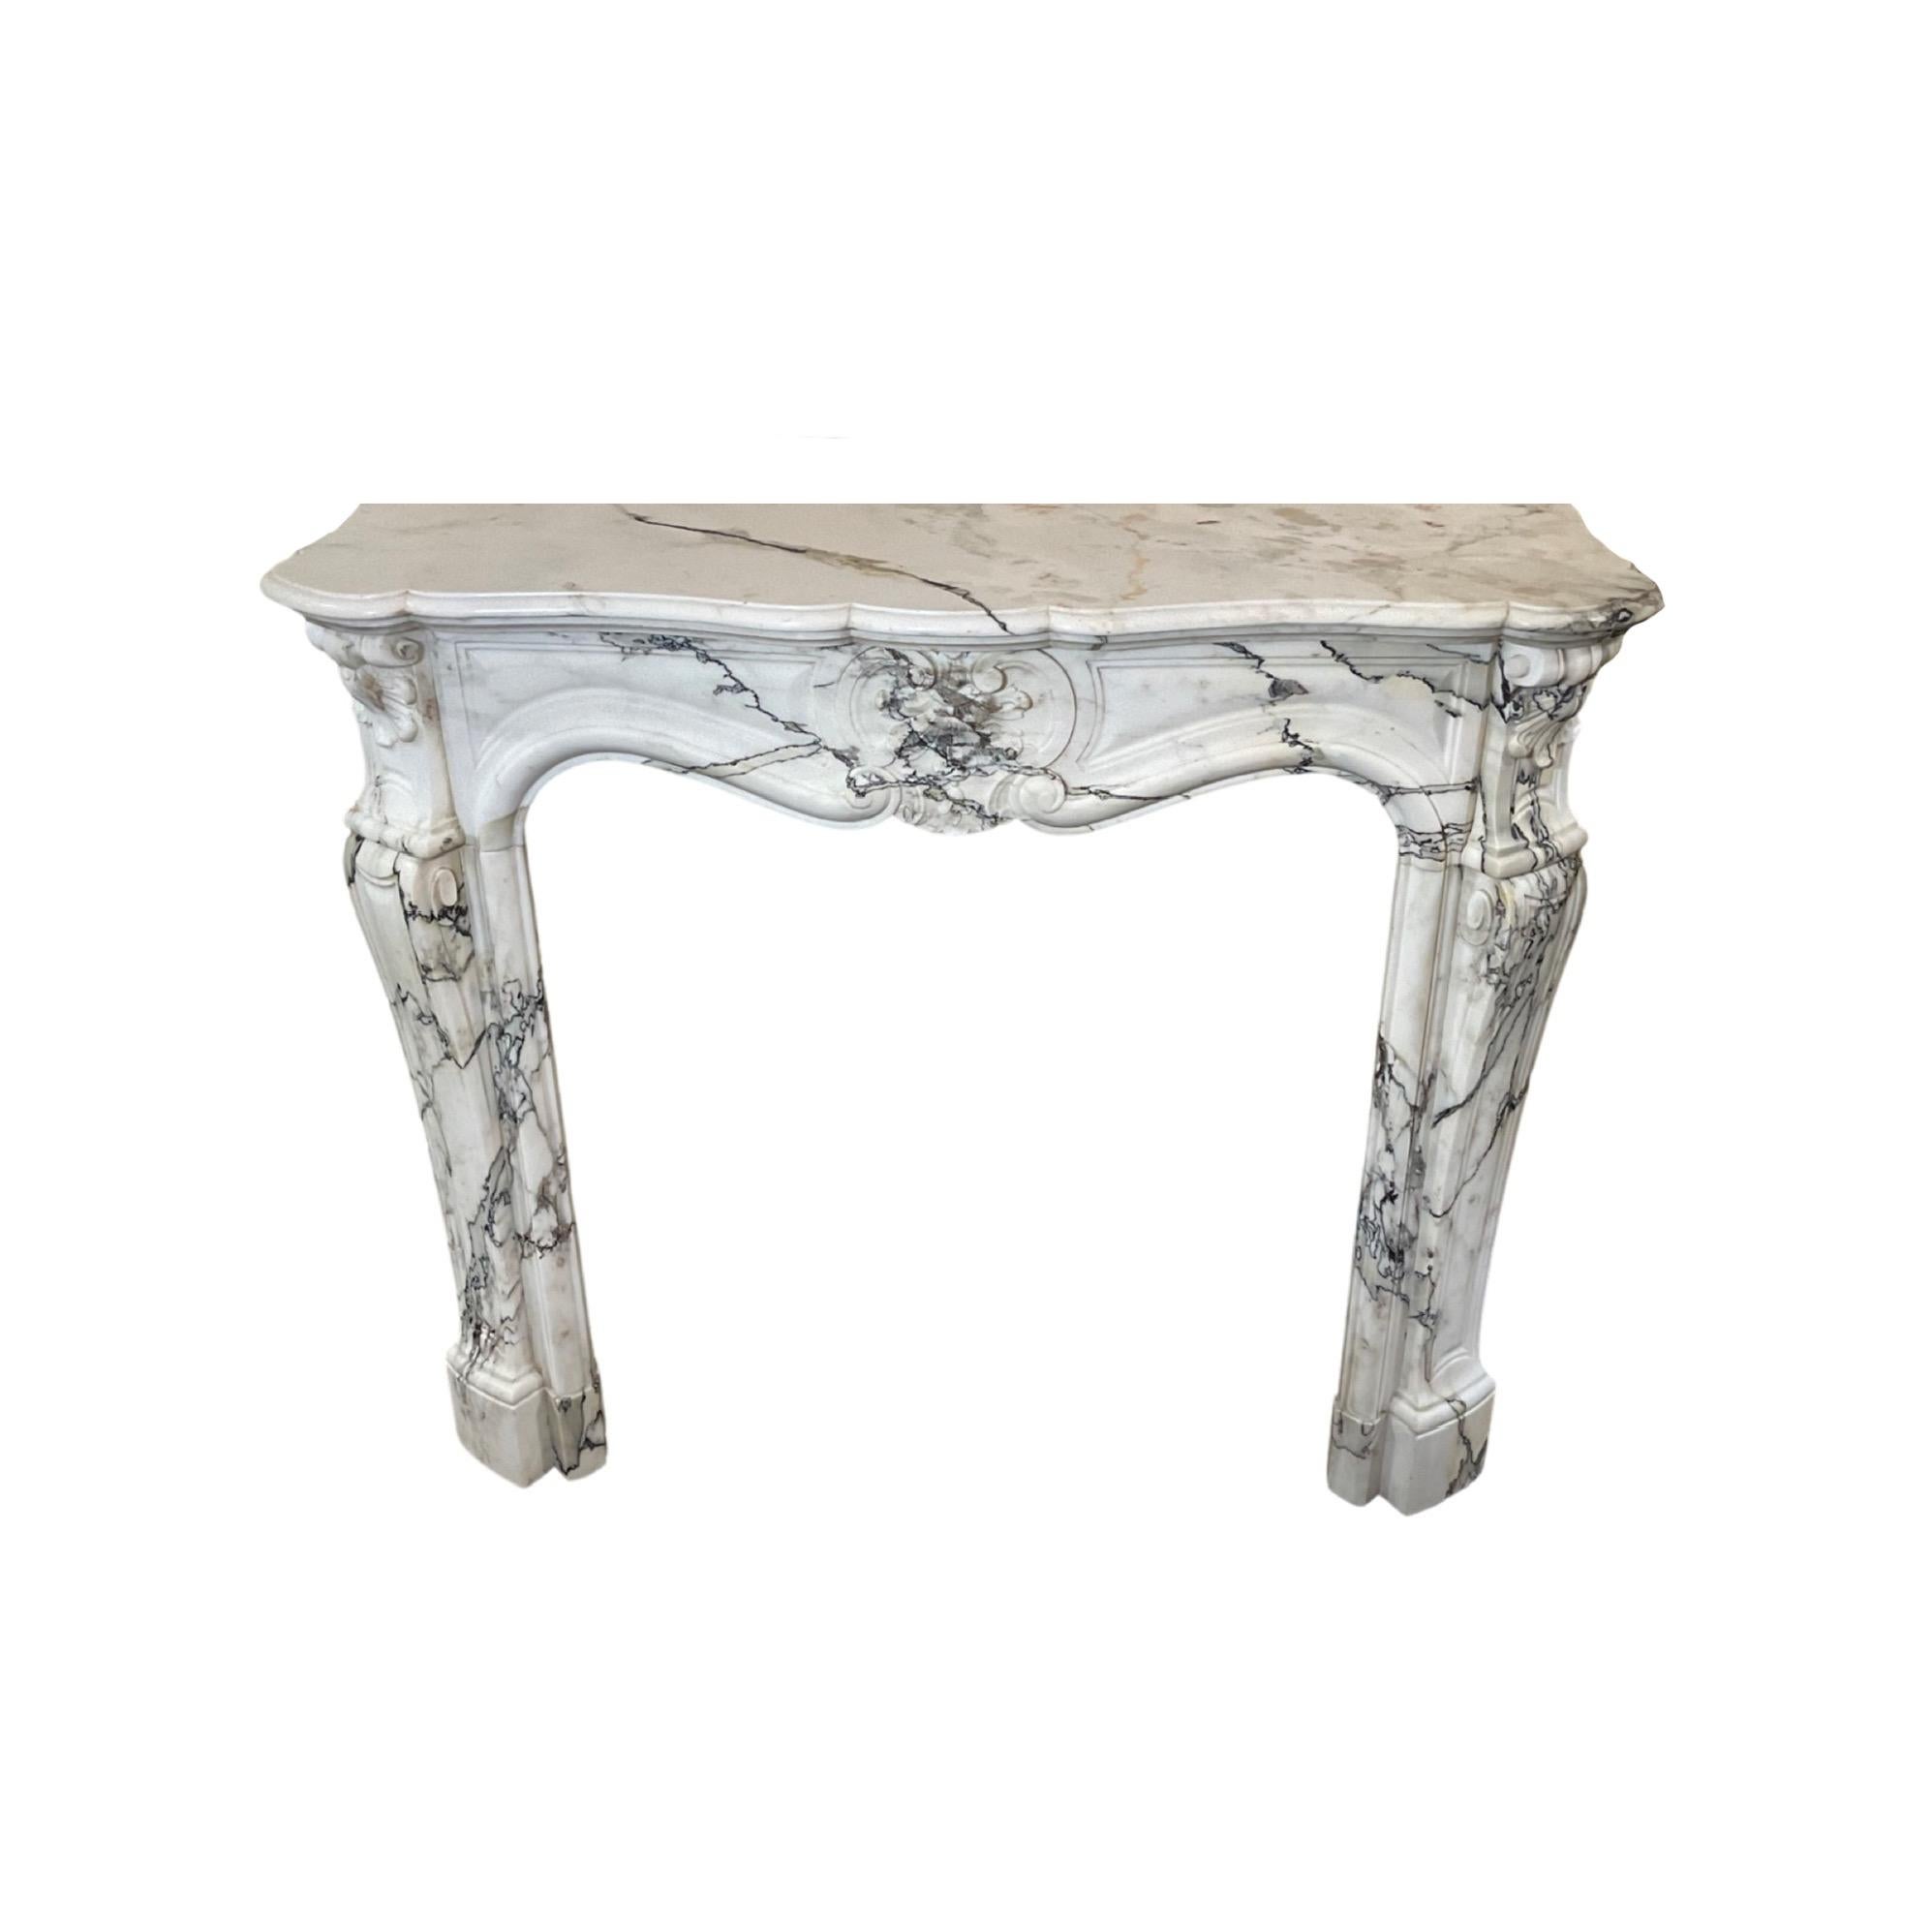 This impressive one-of-a-kind French White Marble Mantel from 1870 features an exquisite Louis XVI design. Crafted in France, this mantel is sure to be a timeless addition to any home.